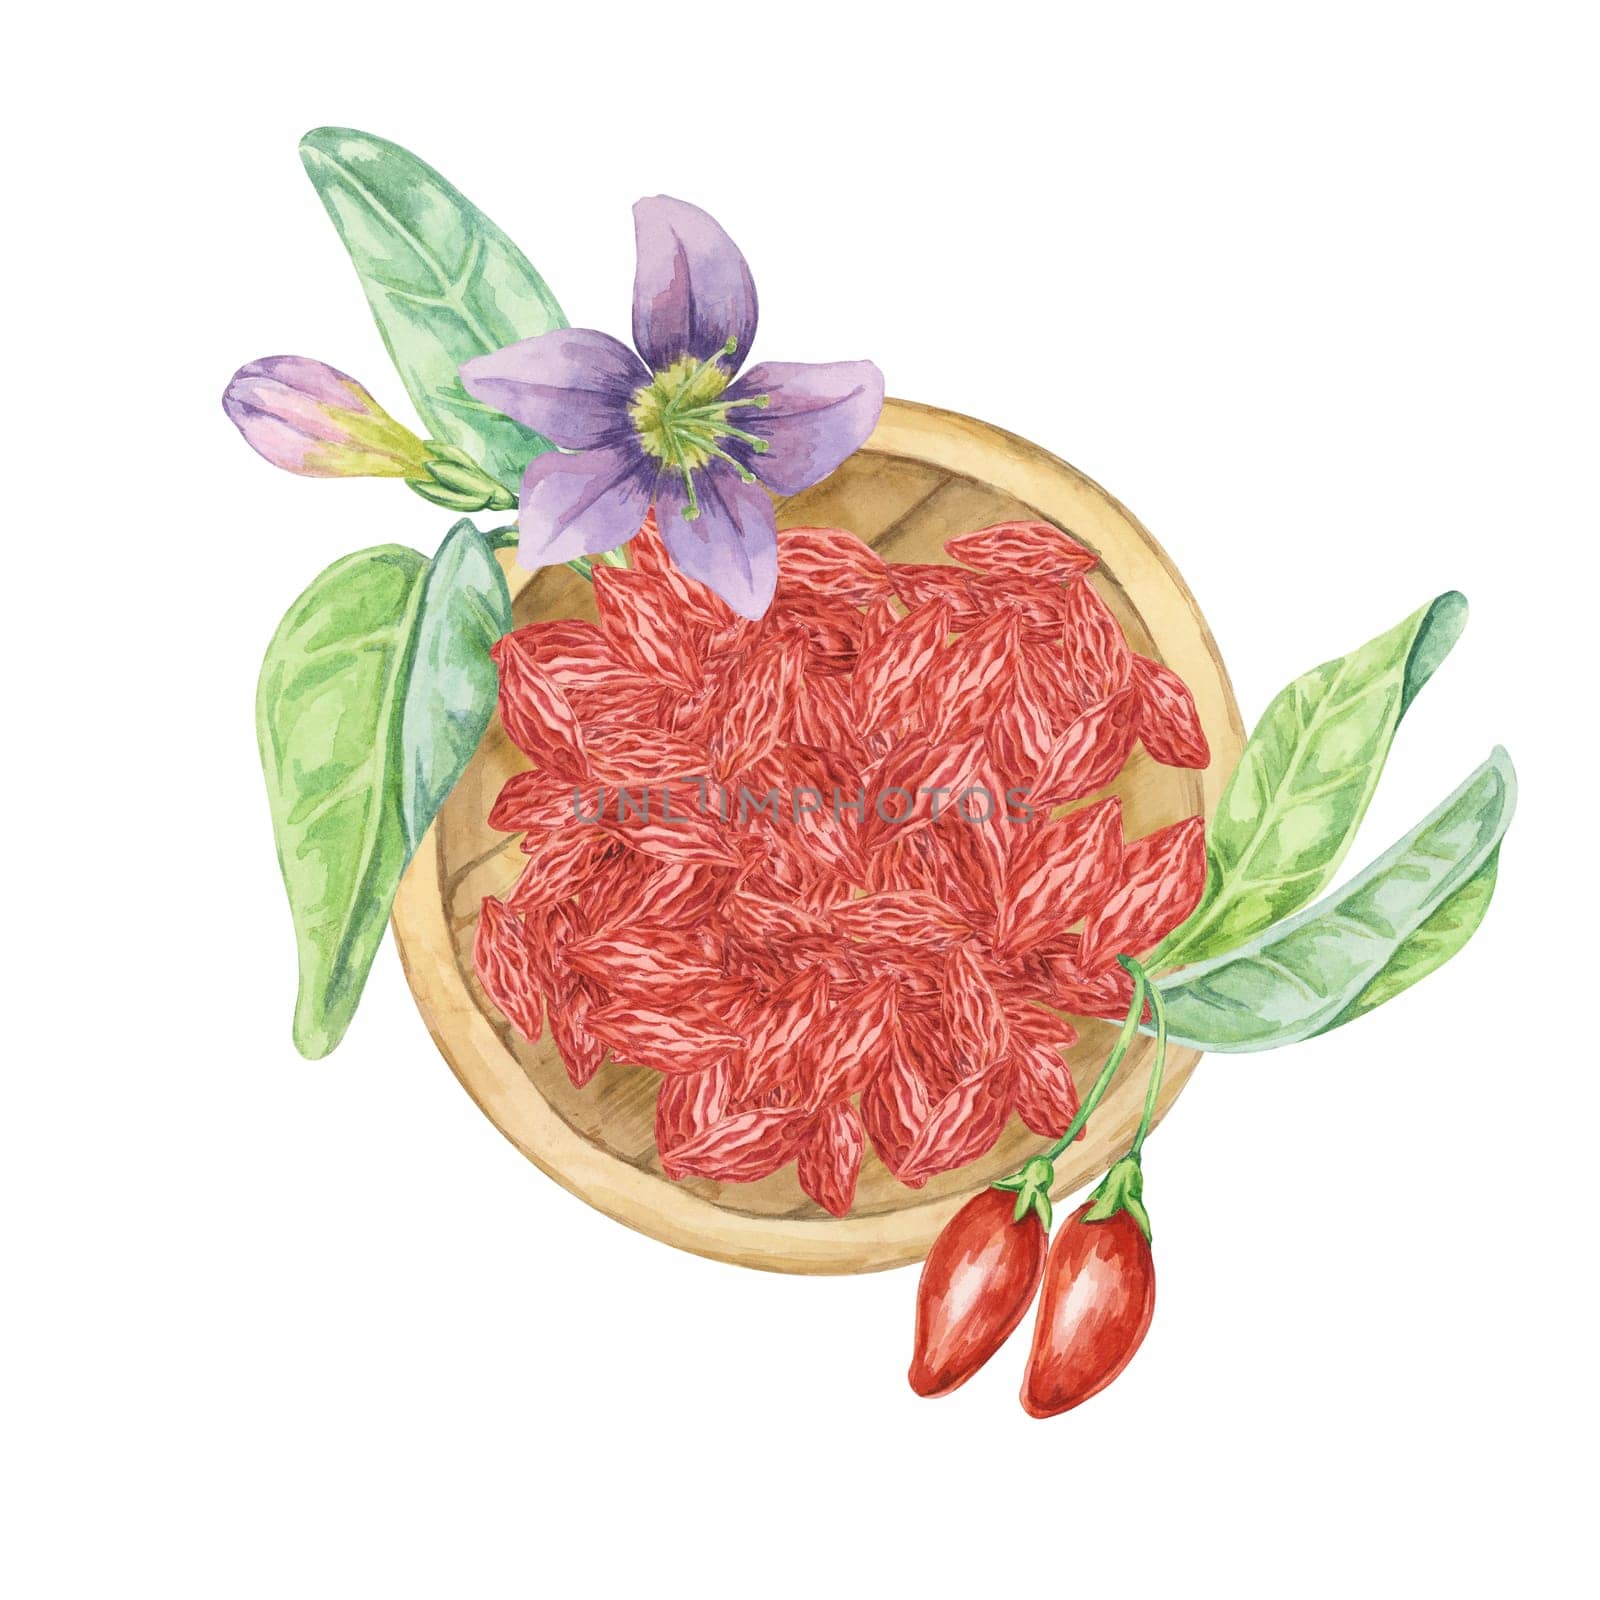 Wooden s plate with dry and fresh goji berries. Hand-drawn watercolor clipart of superfood licium barbarum fruits and flowers. Design for printing, packaging, cards, food supplements isolated on white.